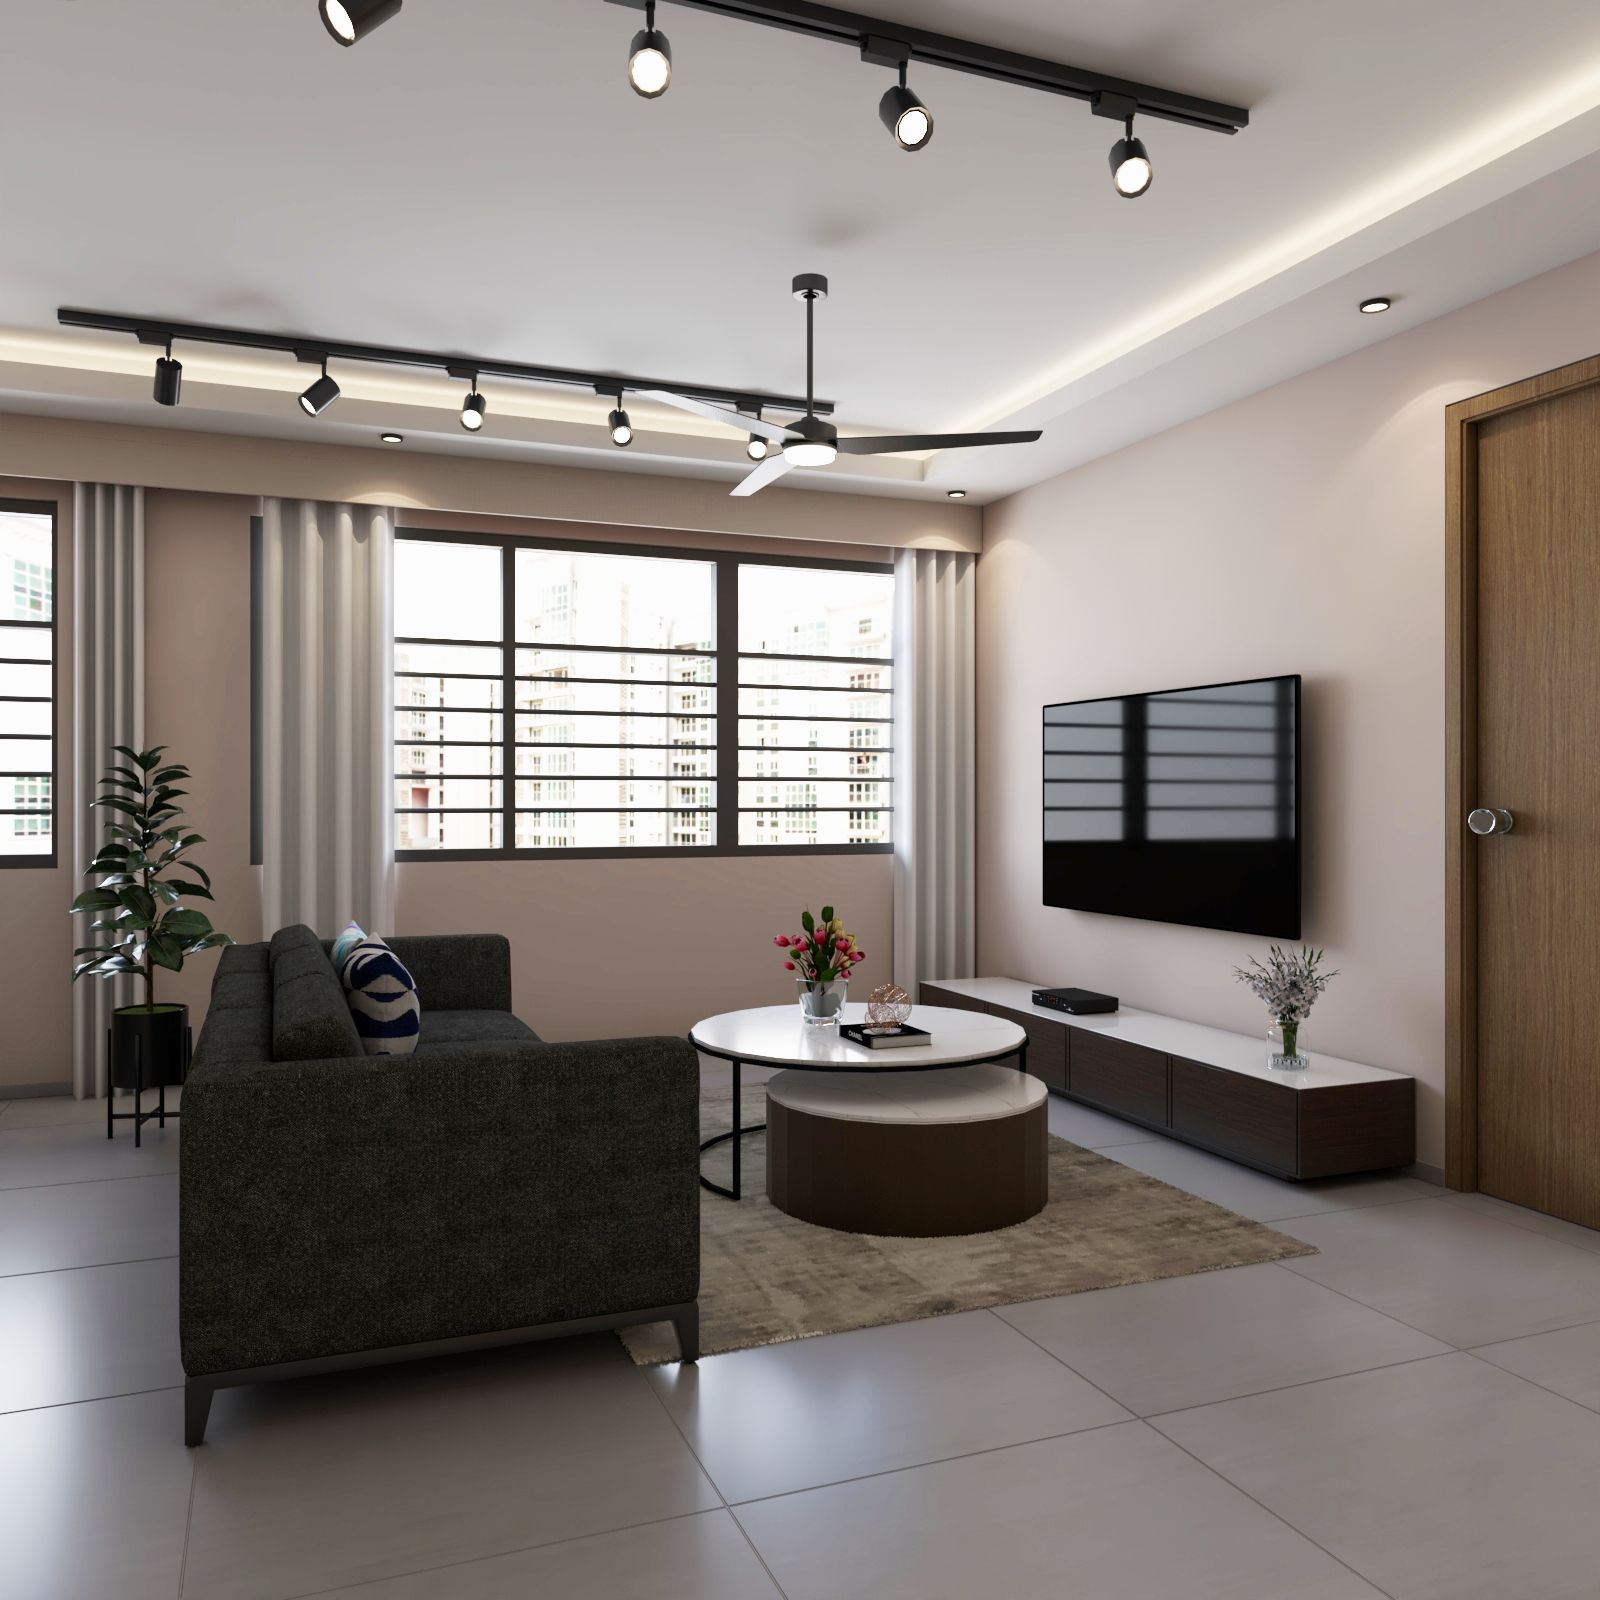 Contemporary Peripheral False Ceiling Design With Track Lights